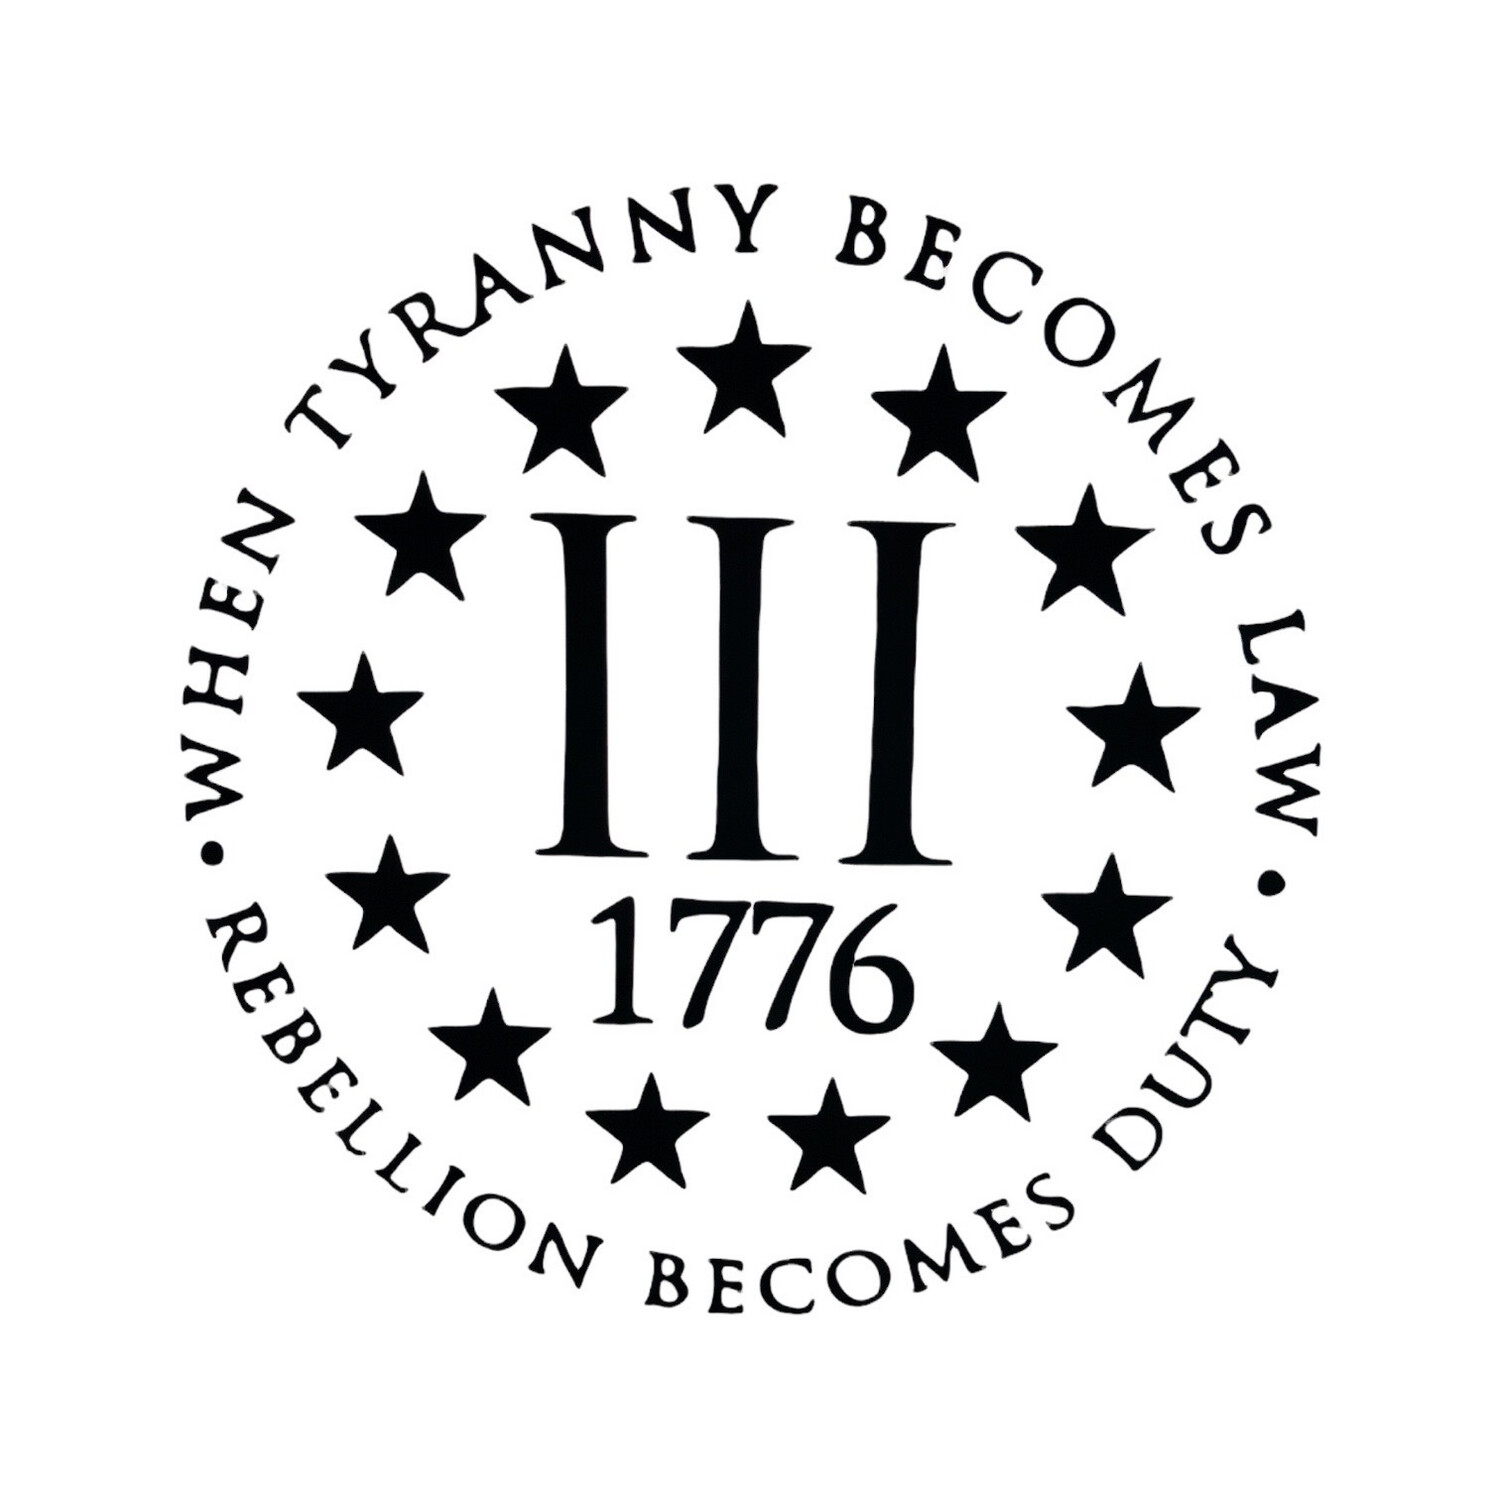 When Tyranny Becomes Decal 11.5